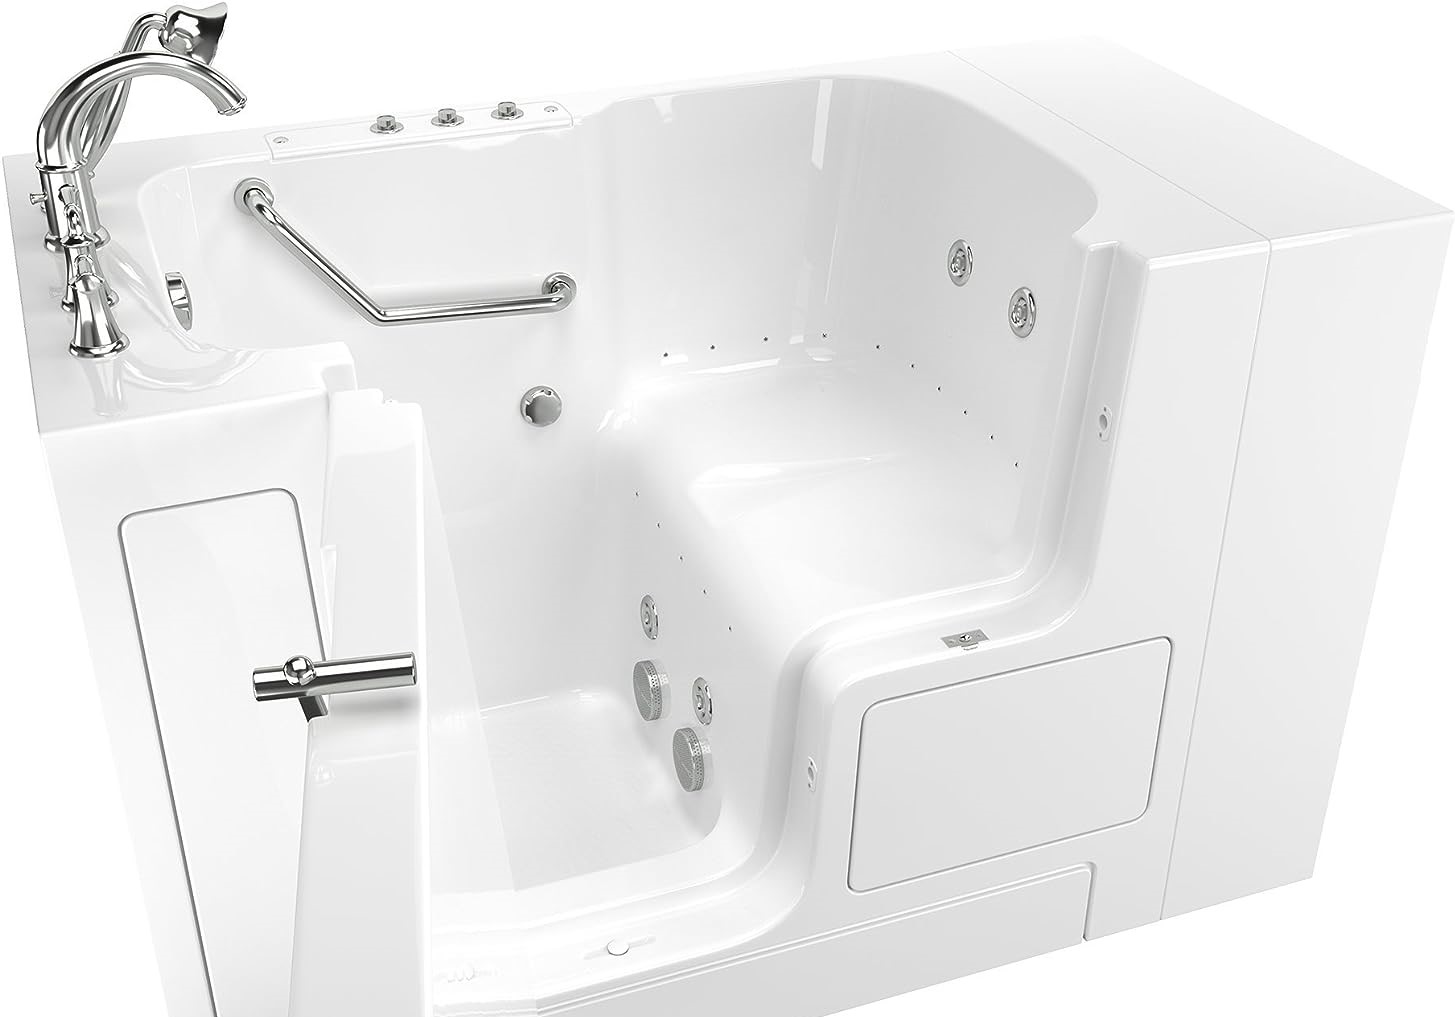 American Standard 3252OD.709.CLW-PC Gelcoat Value Whirlpool and Air Spa 32"x52" Left Side Outward Door Walk-In Bathtub in White Review